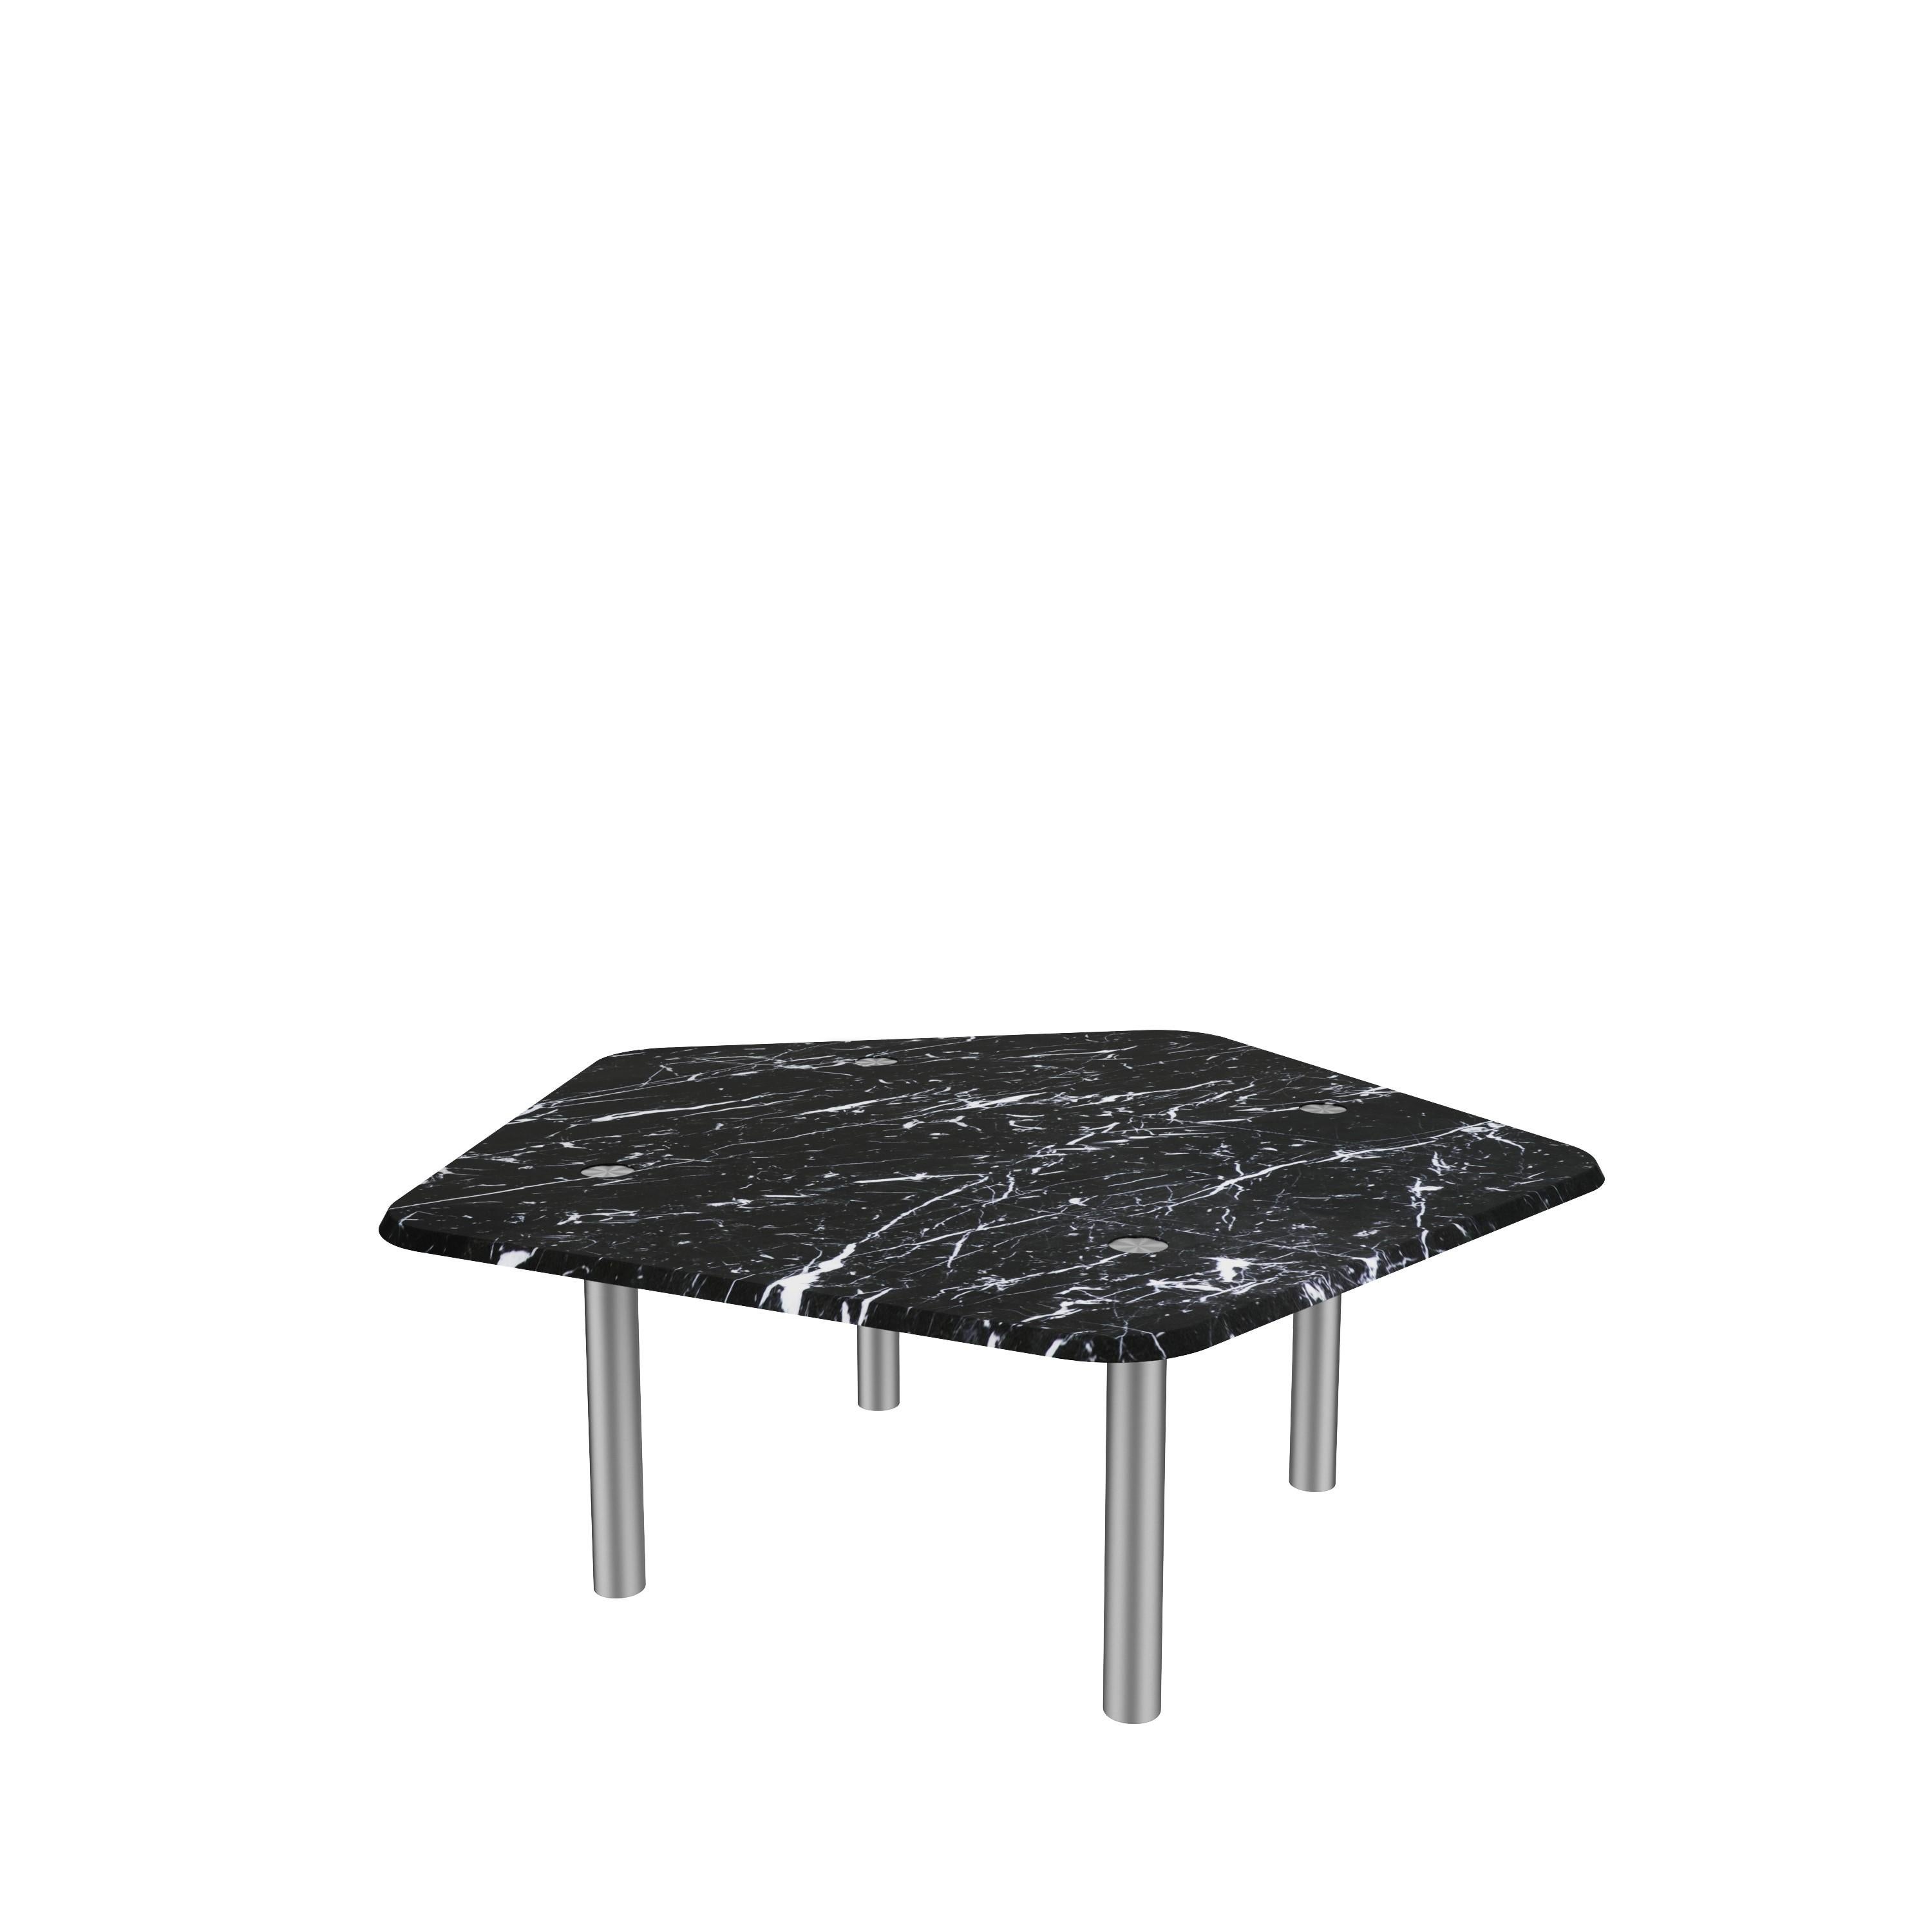 𝗣𝗿𝗼𝗱𝘂𝗰𝘁 𝗗𝗲𝘁𝗮𝗶𝗹𝘀:
Modern coffee table with a pentagonal shape tabletop.Its four legs frame go through the marble tabletop to expose the nicely done metal work on the surface. The different heights of the smaller tables in this